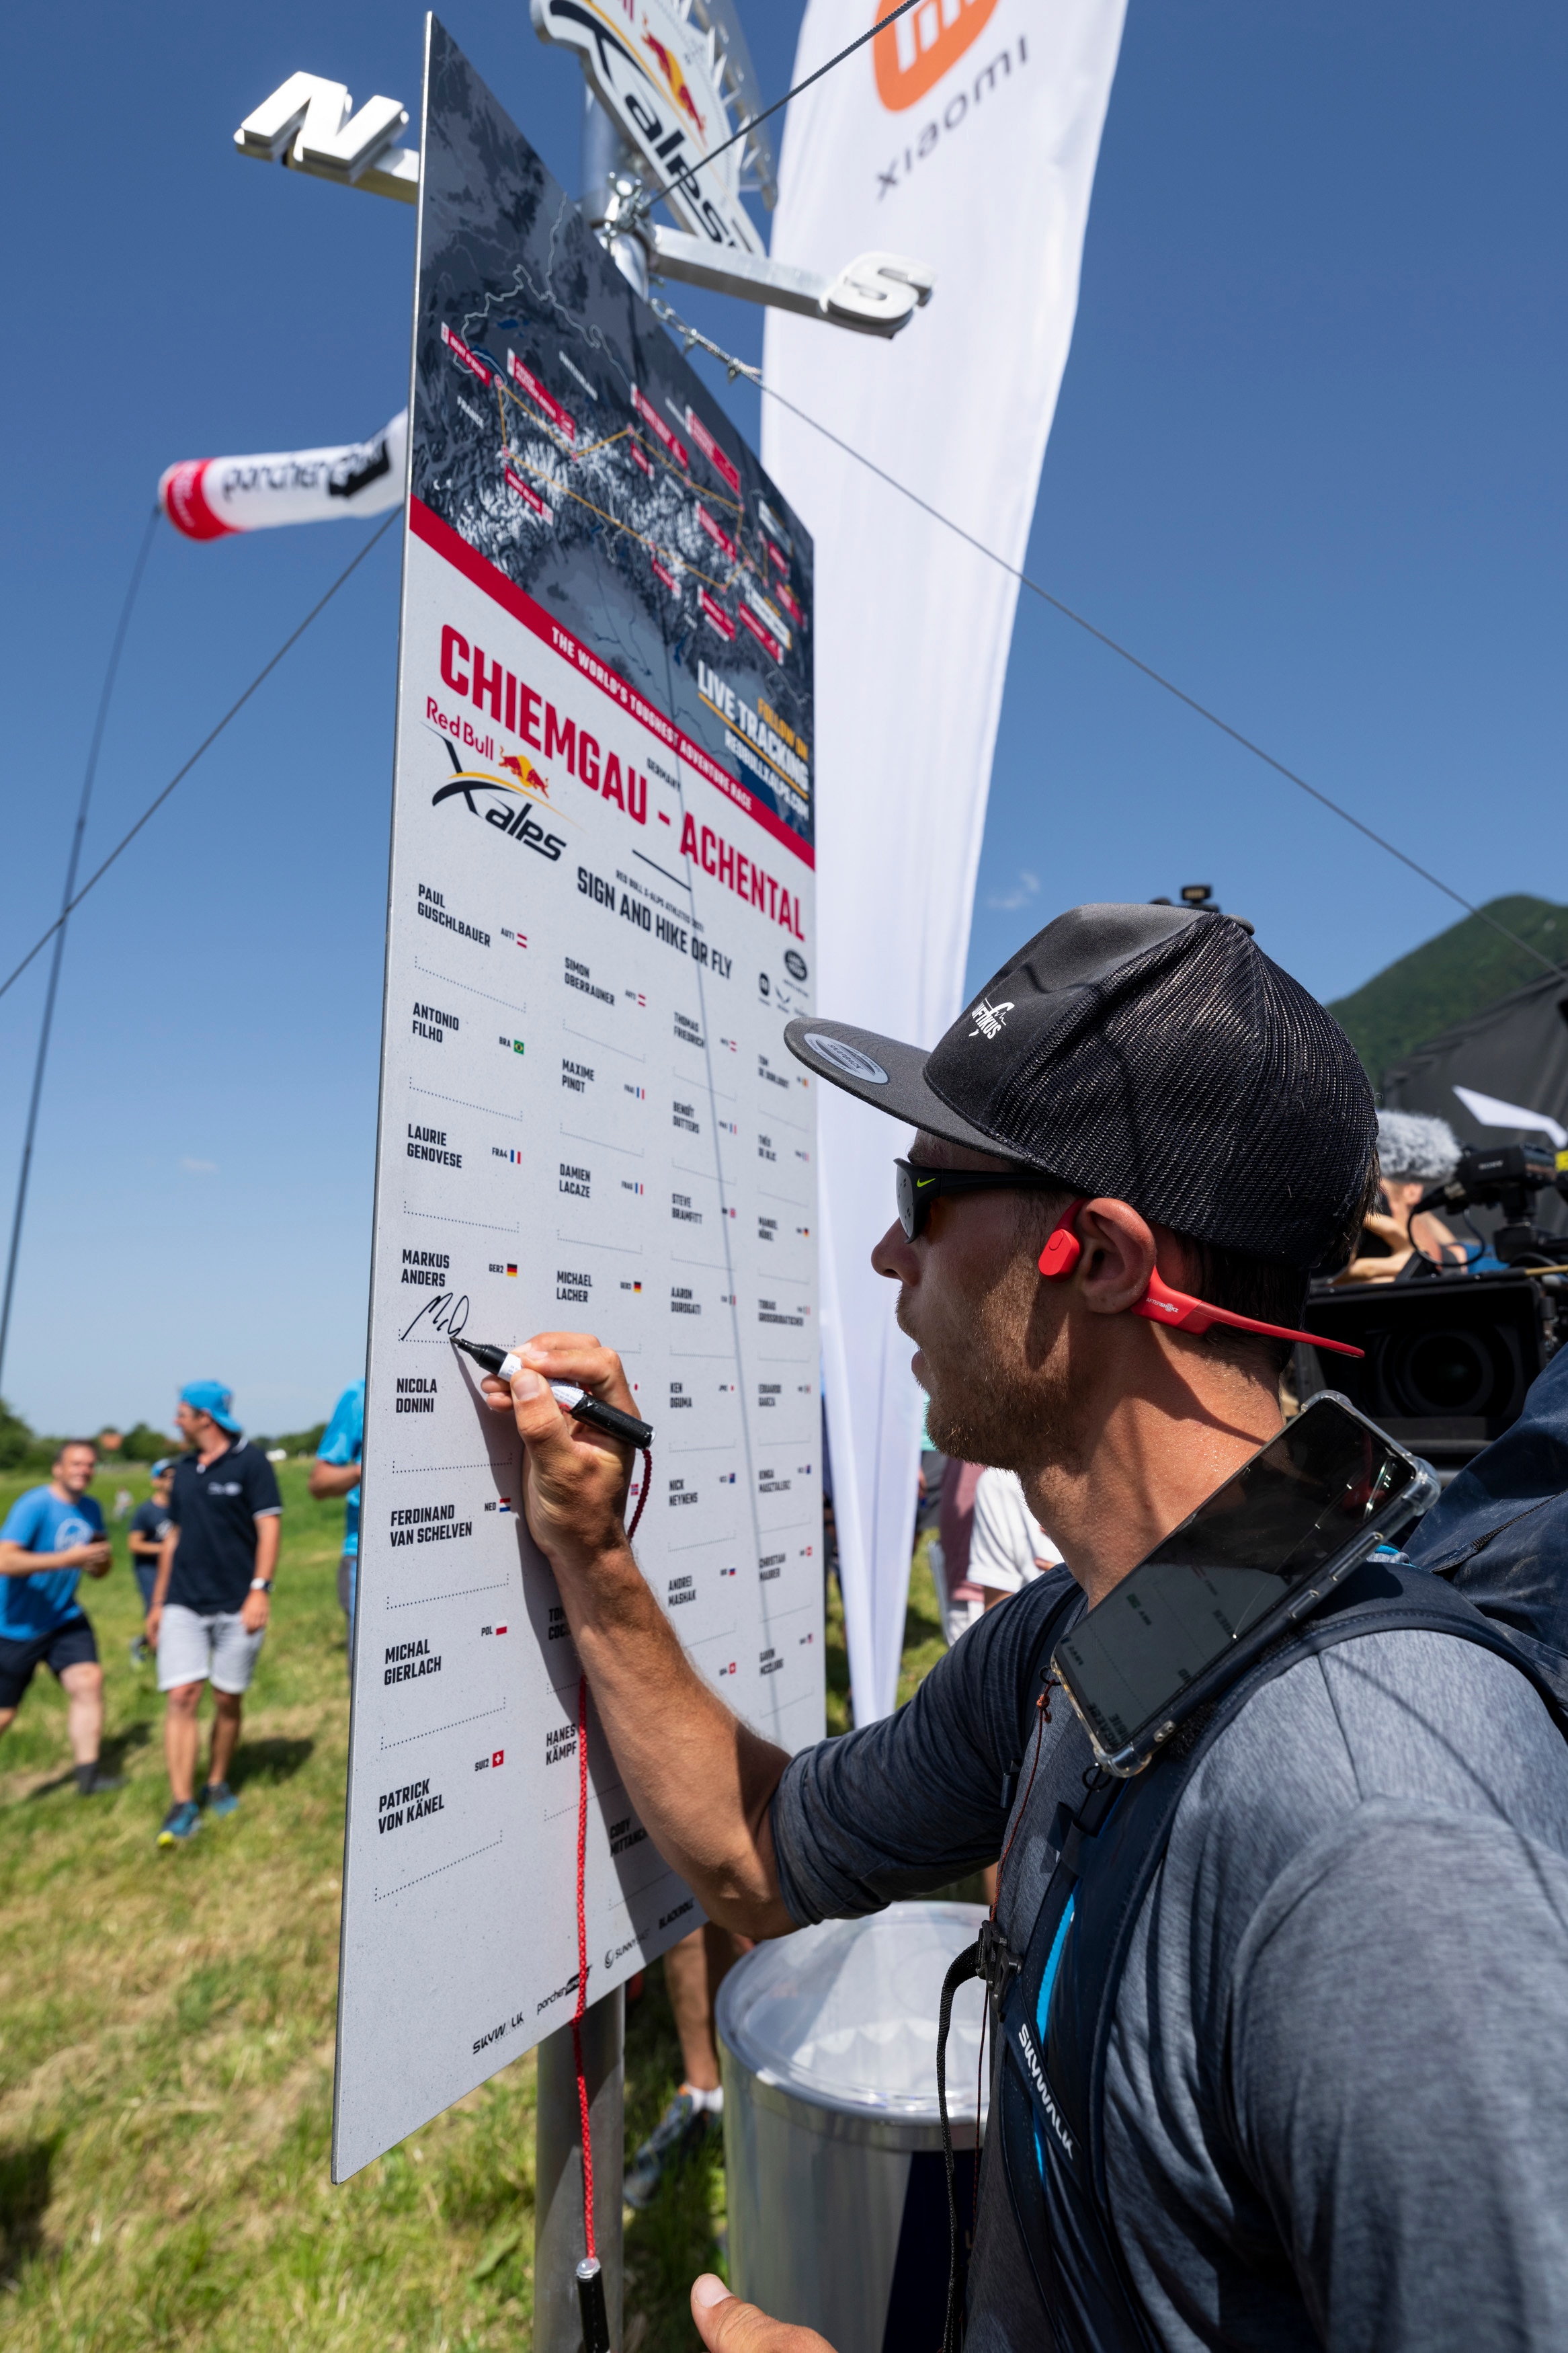 GER2 performs during the Red Bull X-Alps in Marquartstein, Germany on June 21, 2021.